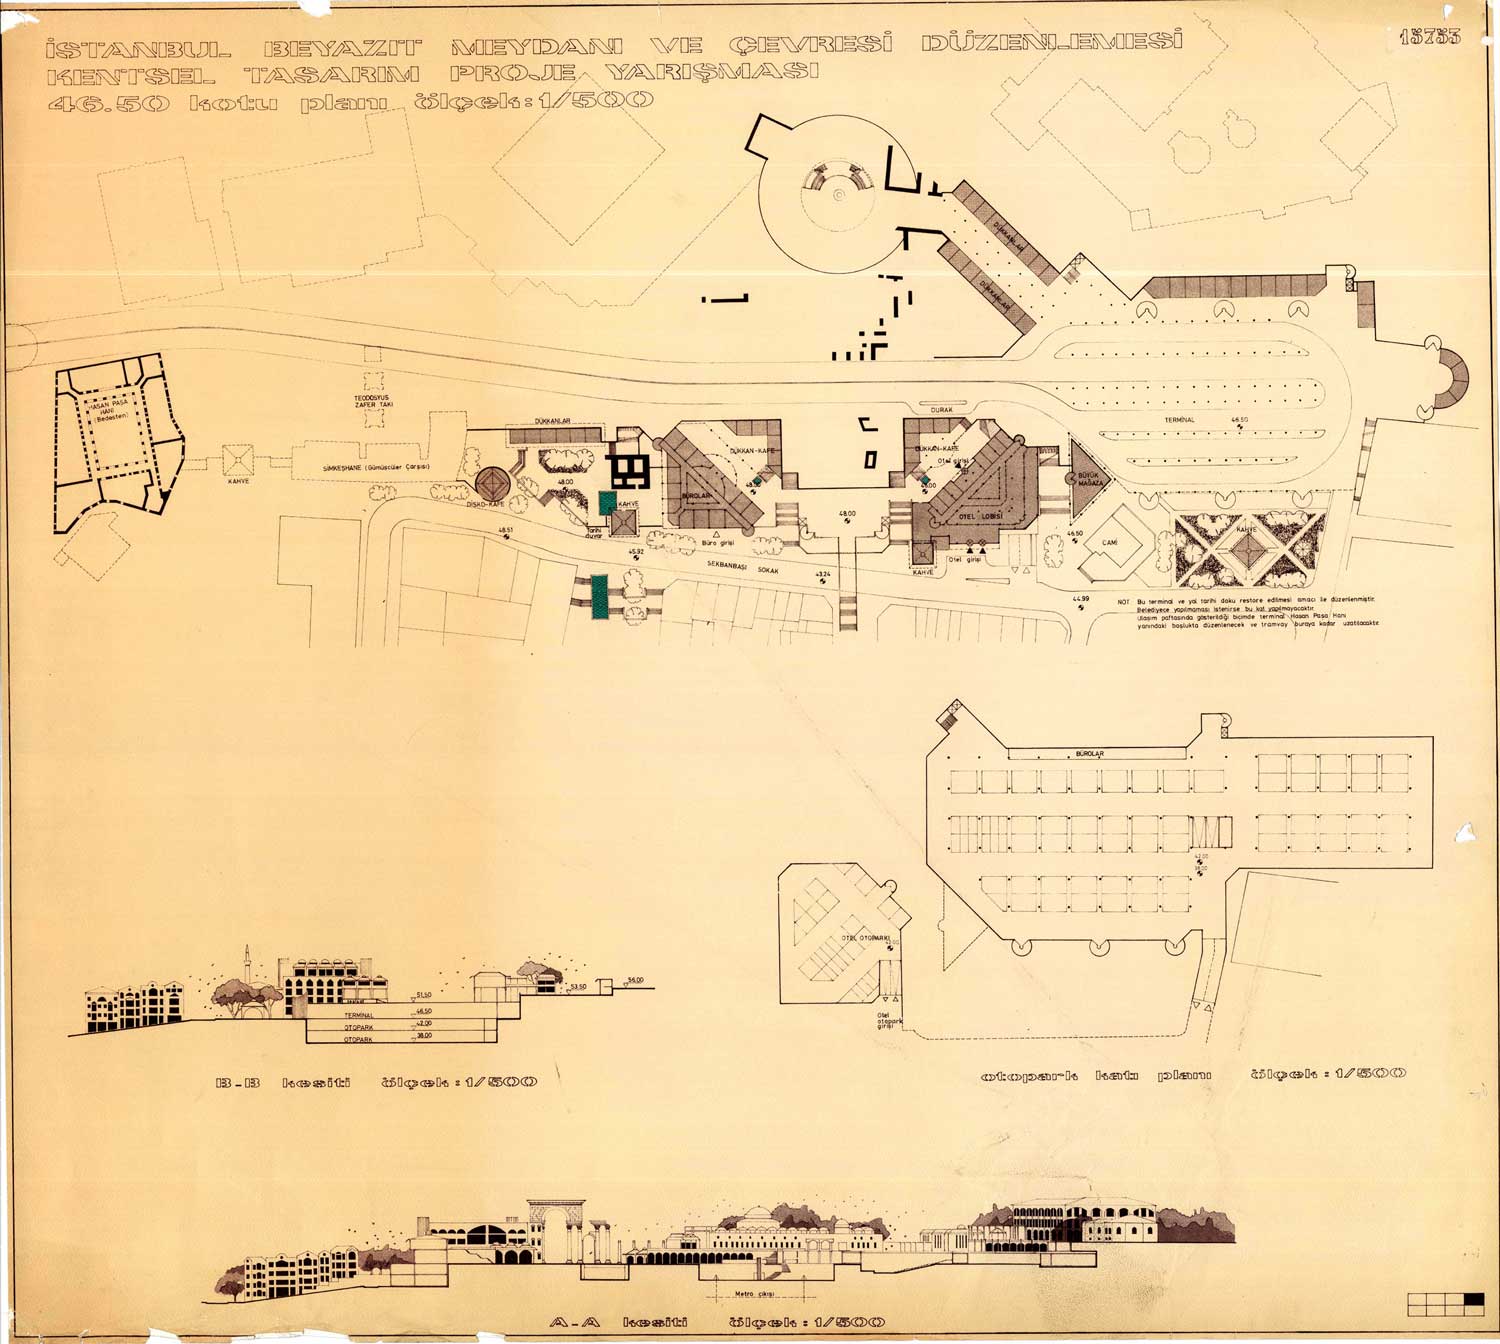 Beyazit Square, Urban Design Competition 1987. Ground plans and cross-sectionals, by Fatma Vedia Dökmeci and Yaprak Karlıdağ.